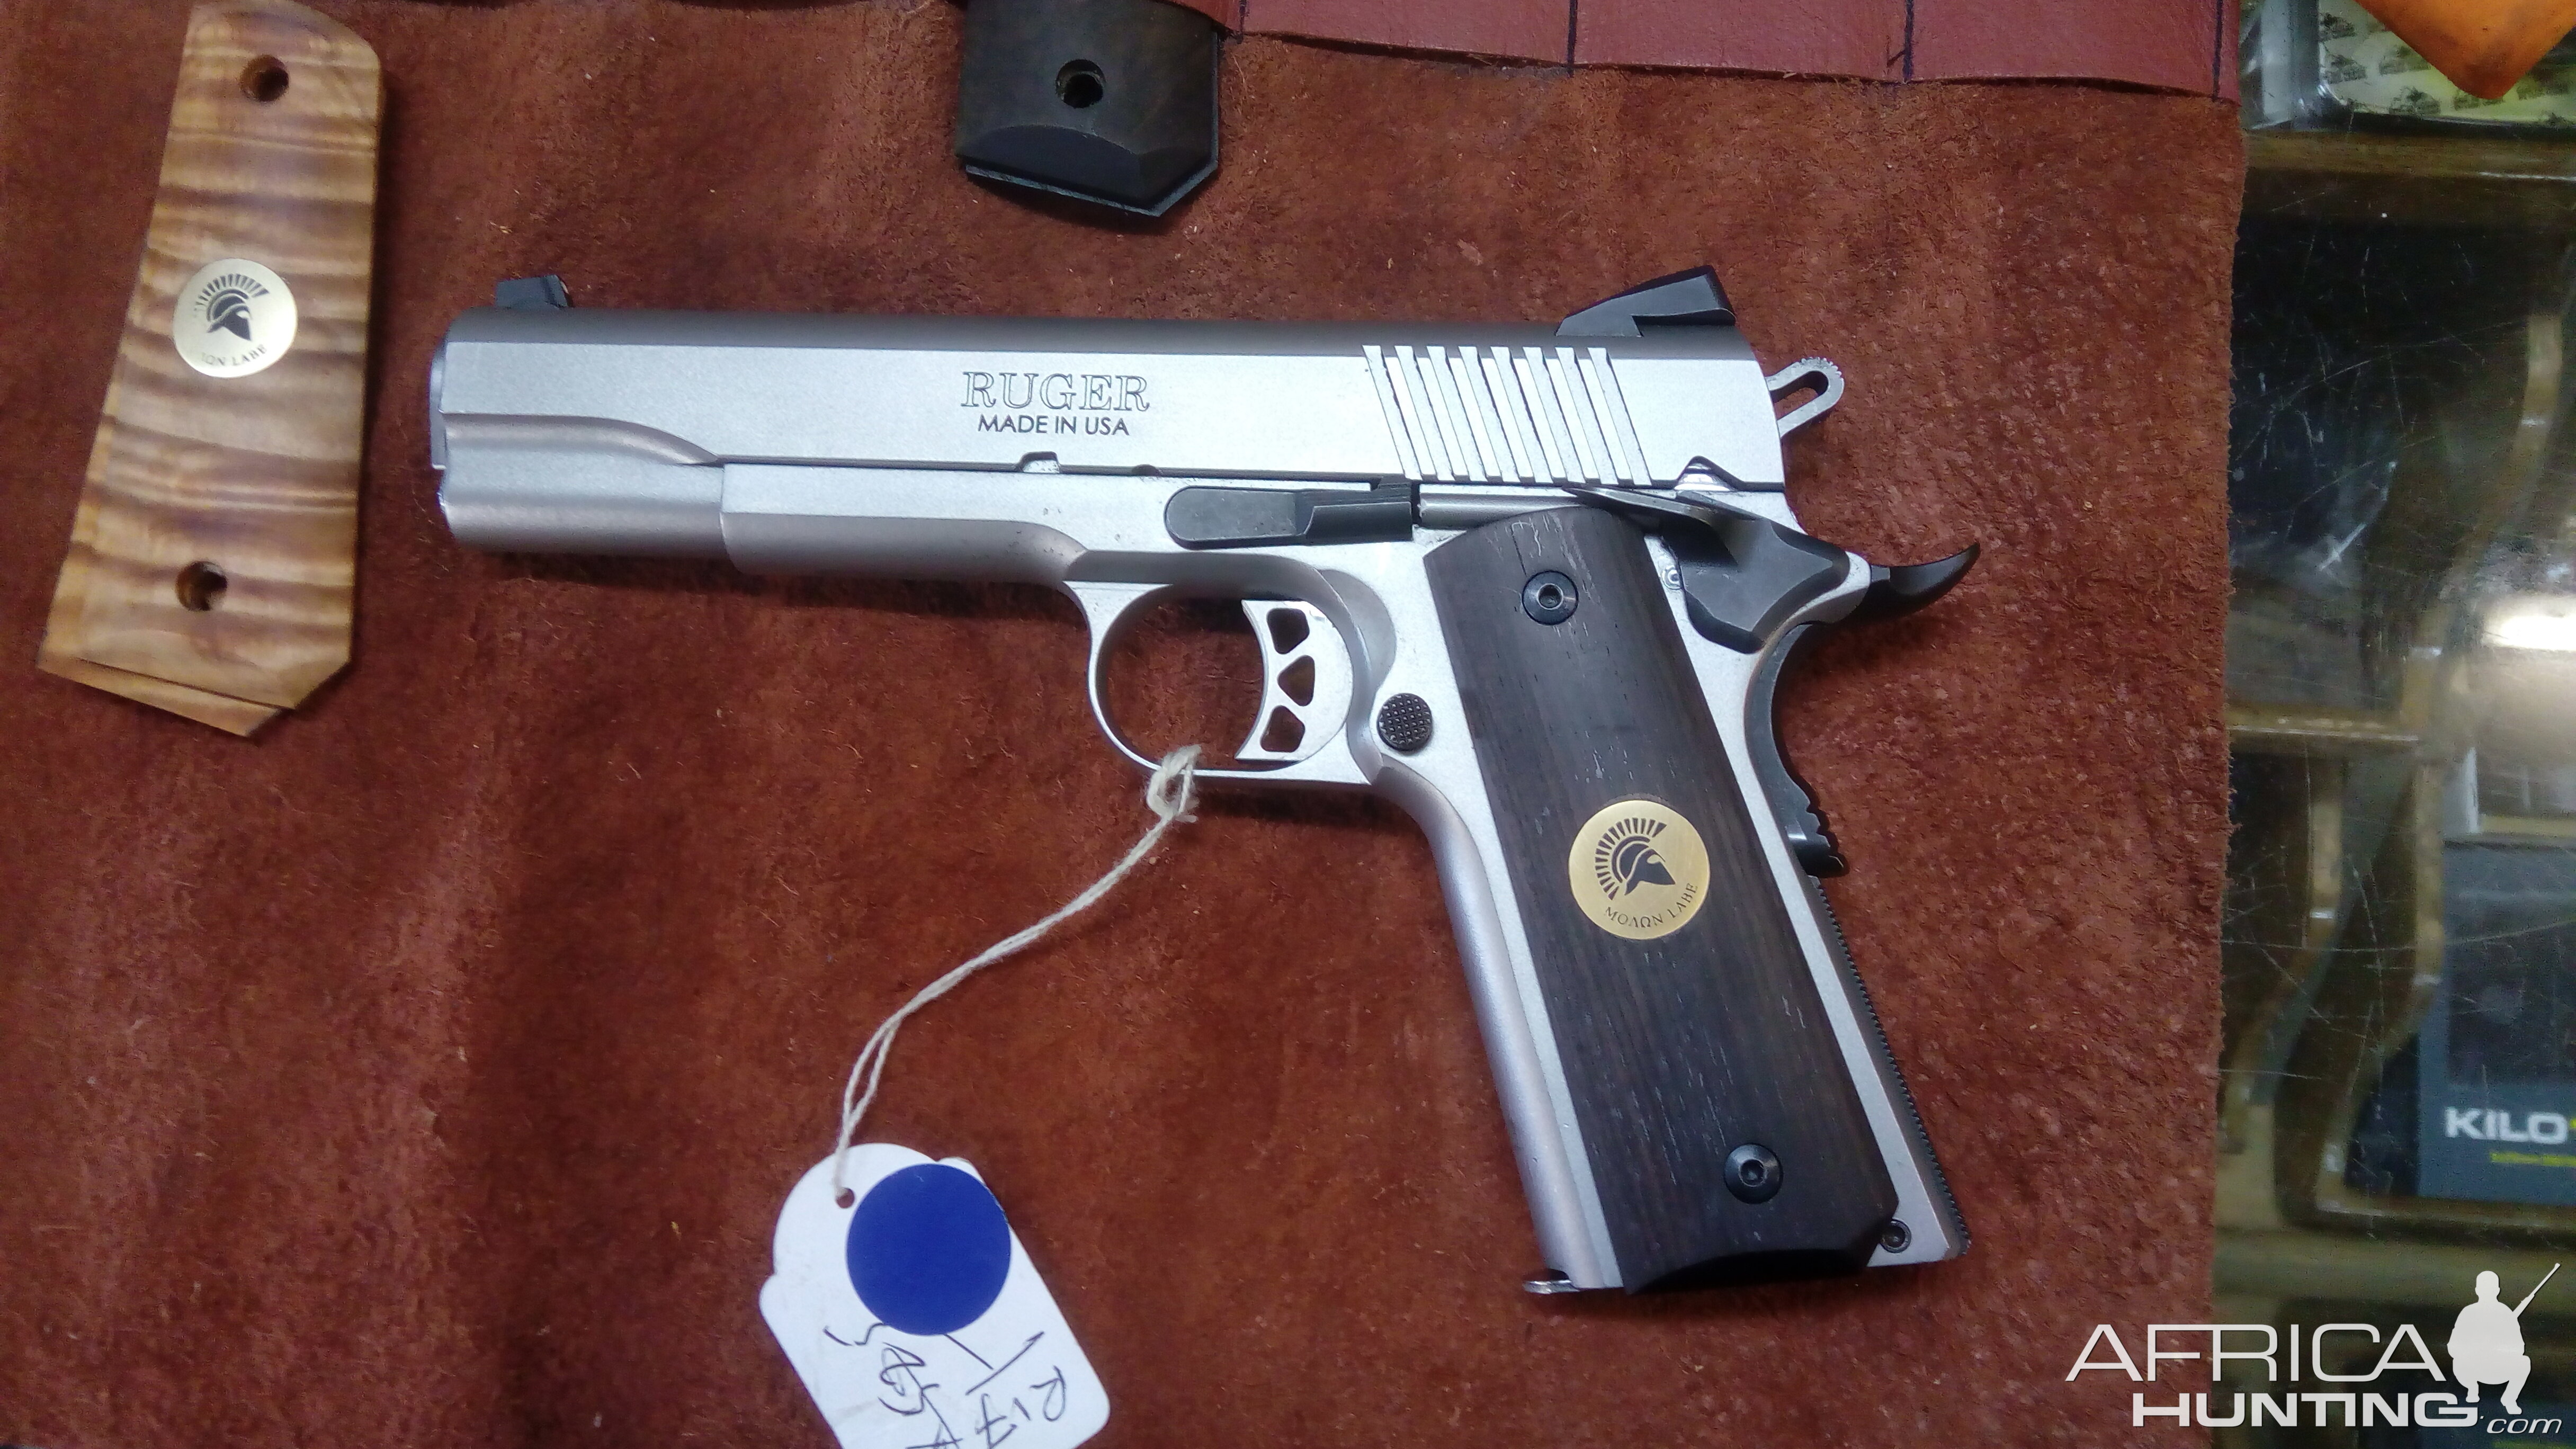 1911 Grip on Ruger Pistol Finished Product